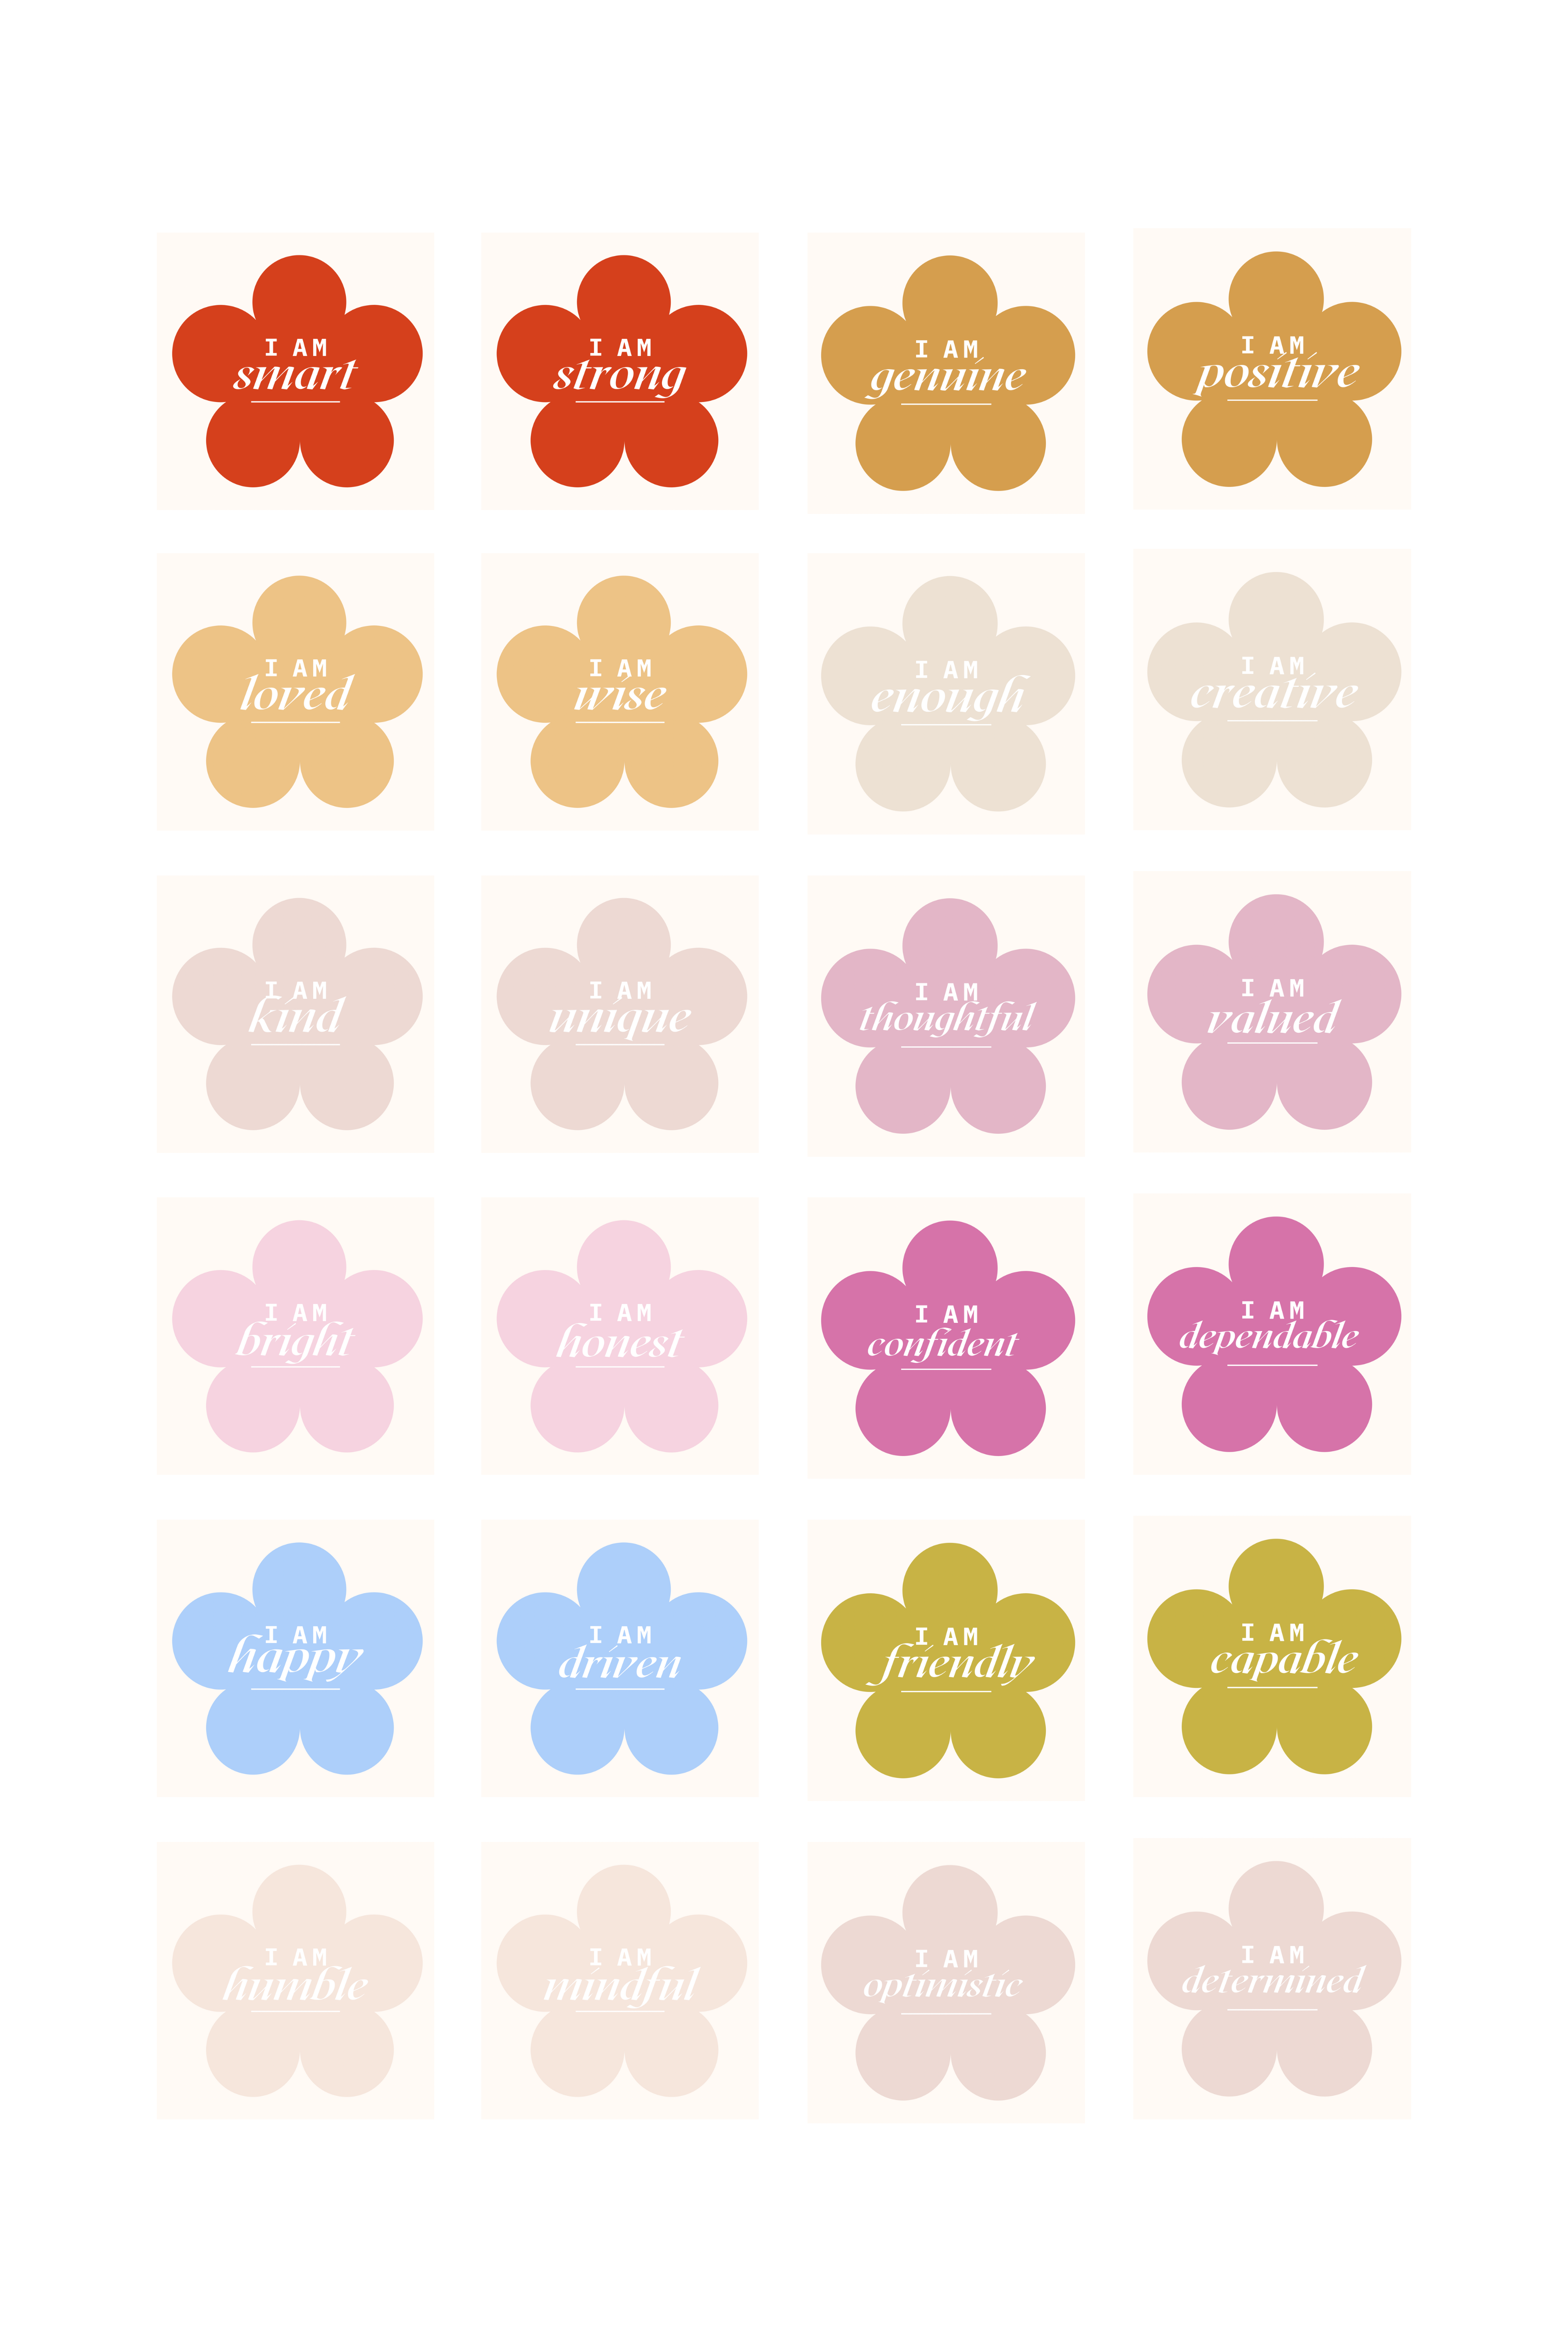 Printable affirmations — in color